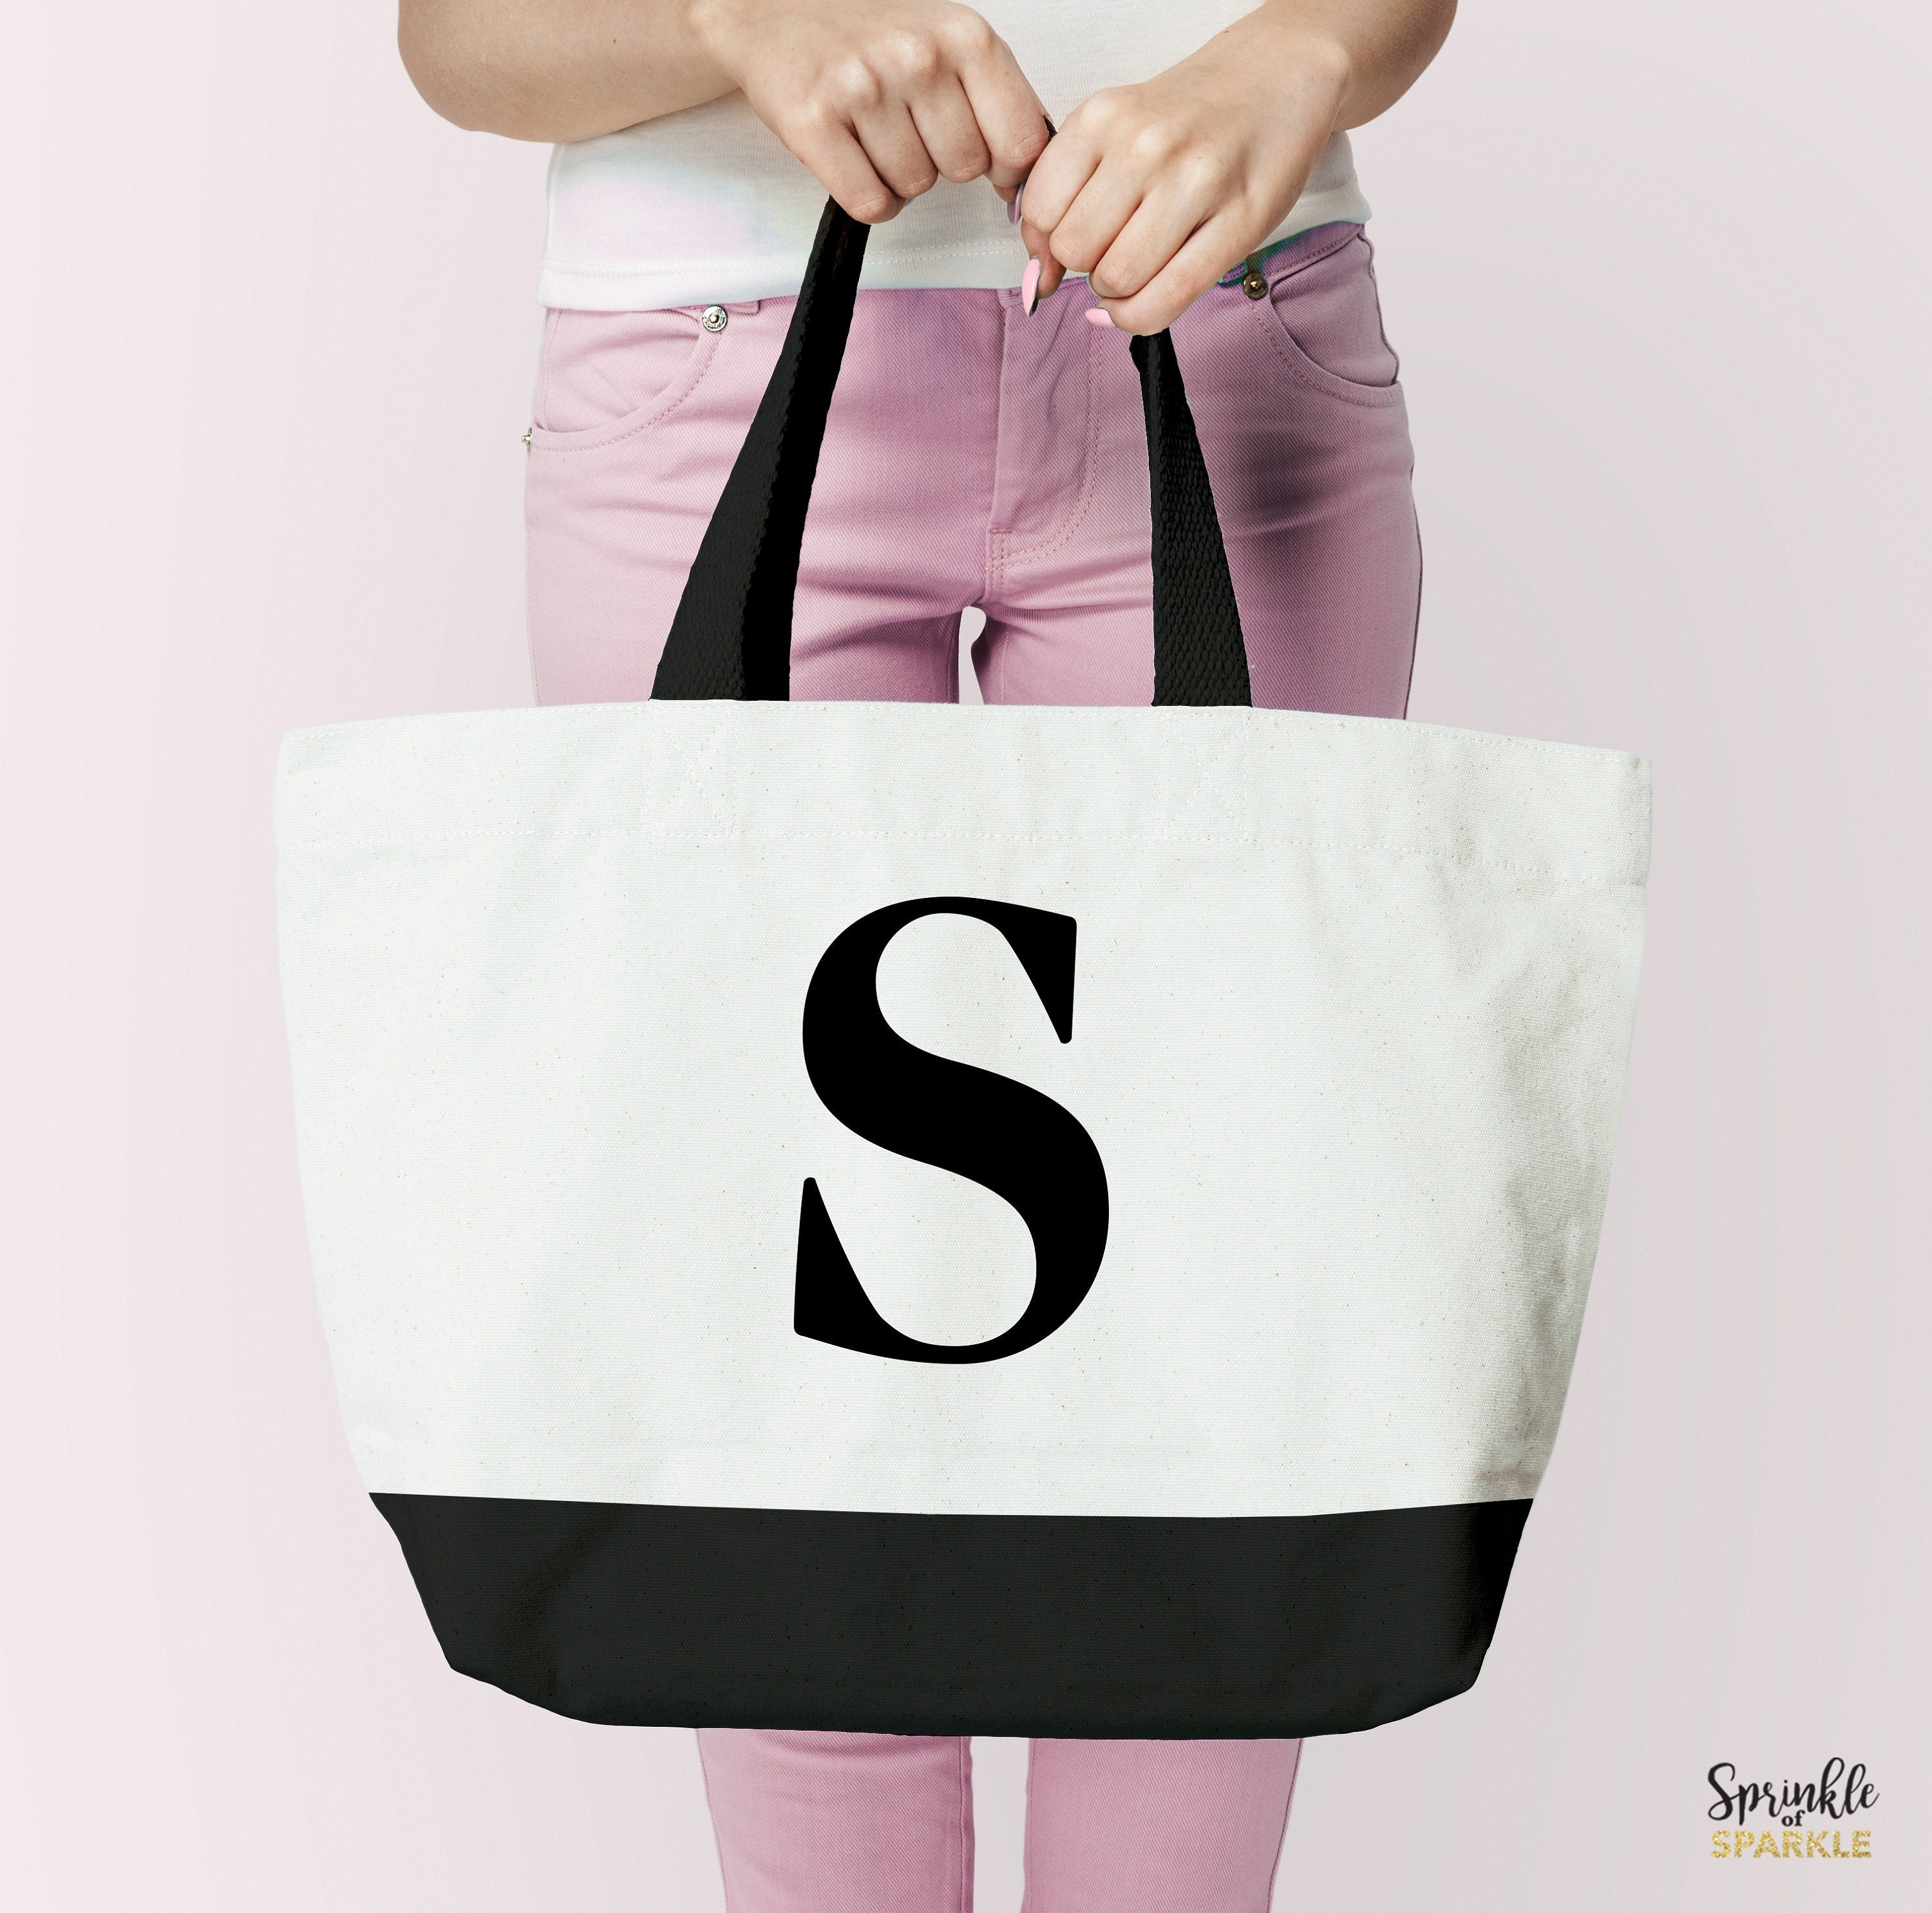 Clearance!SDJMa Initial Printed Canvas Tote Bag, Personalized Shoulder  Handbag with Inner Zipper Pocket, Open Beach Bag for Vacation, Present Bag  for